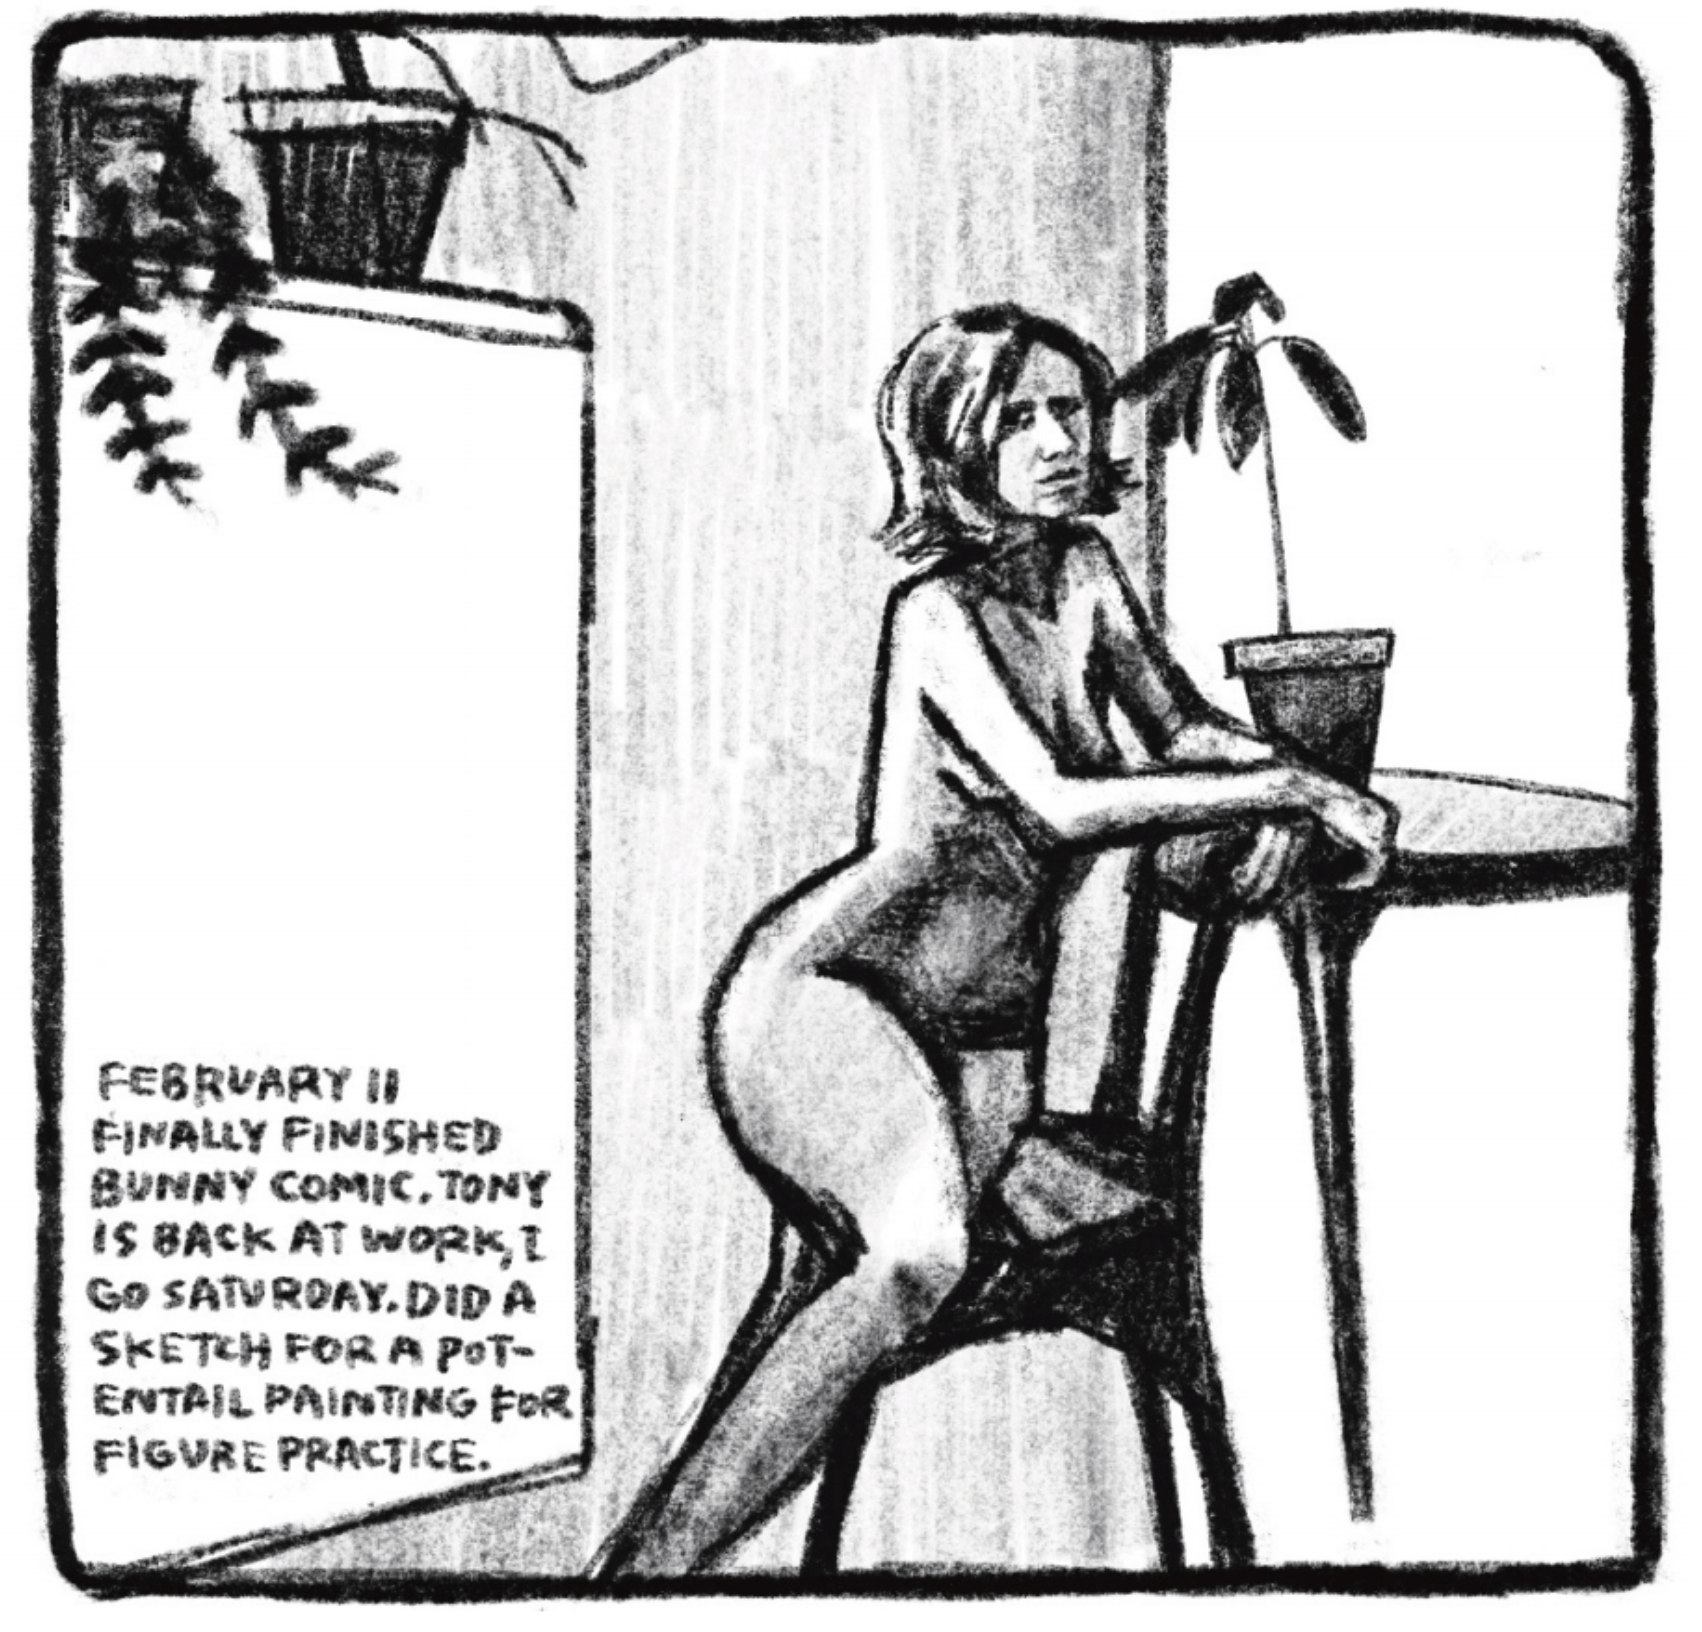 Hold Still Episode 8, Panel 1
"FEBRUARY 11
FINALLY FINISHED BUNNY COMIC. TONY IS BACK AT WORK, I GO SATURDAY. DID A SKETCH FOR A POTENTIAL PAINTING FOR FIGURE PRACTICE."
Drawing of Kim posing, sitting on a chair naked, arms draped over the back of the chair and a side table. There are potted plants in the background